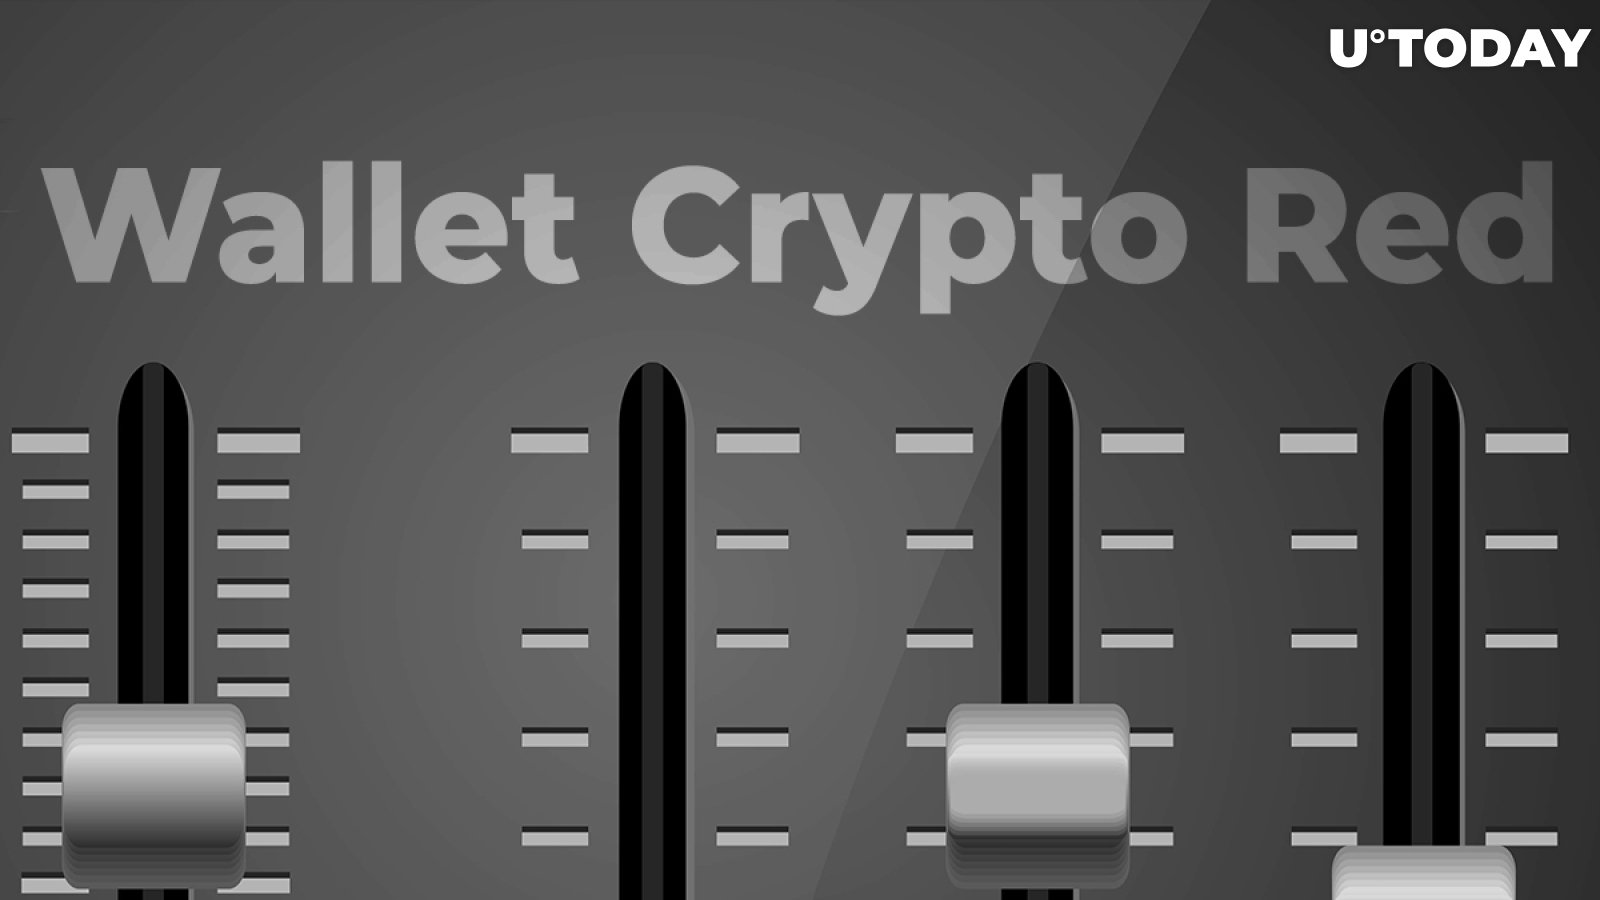 Wallet Crypto Red Launched All-In-One Wallet with Mixer and Trading Module: Details